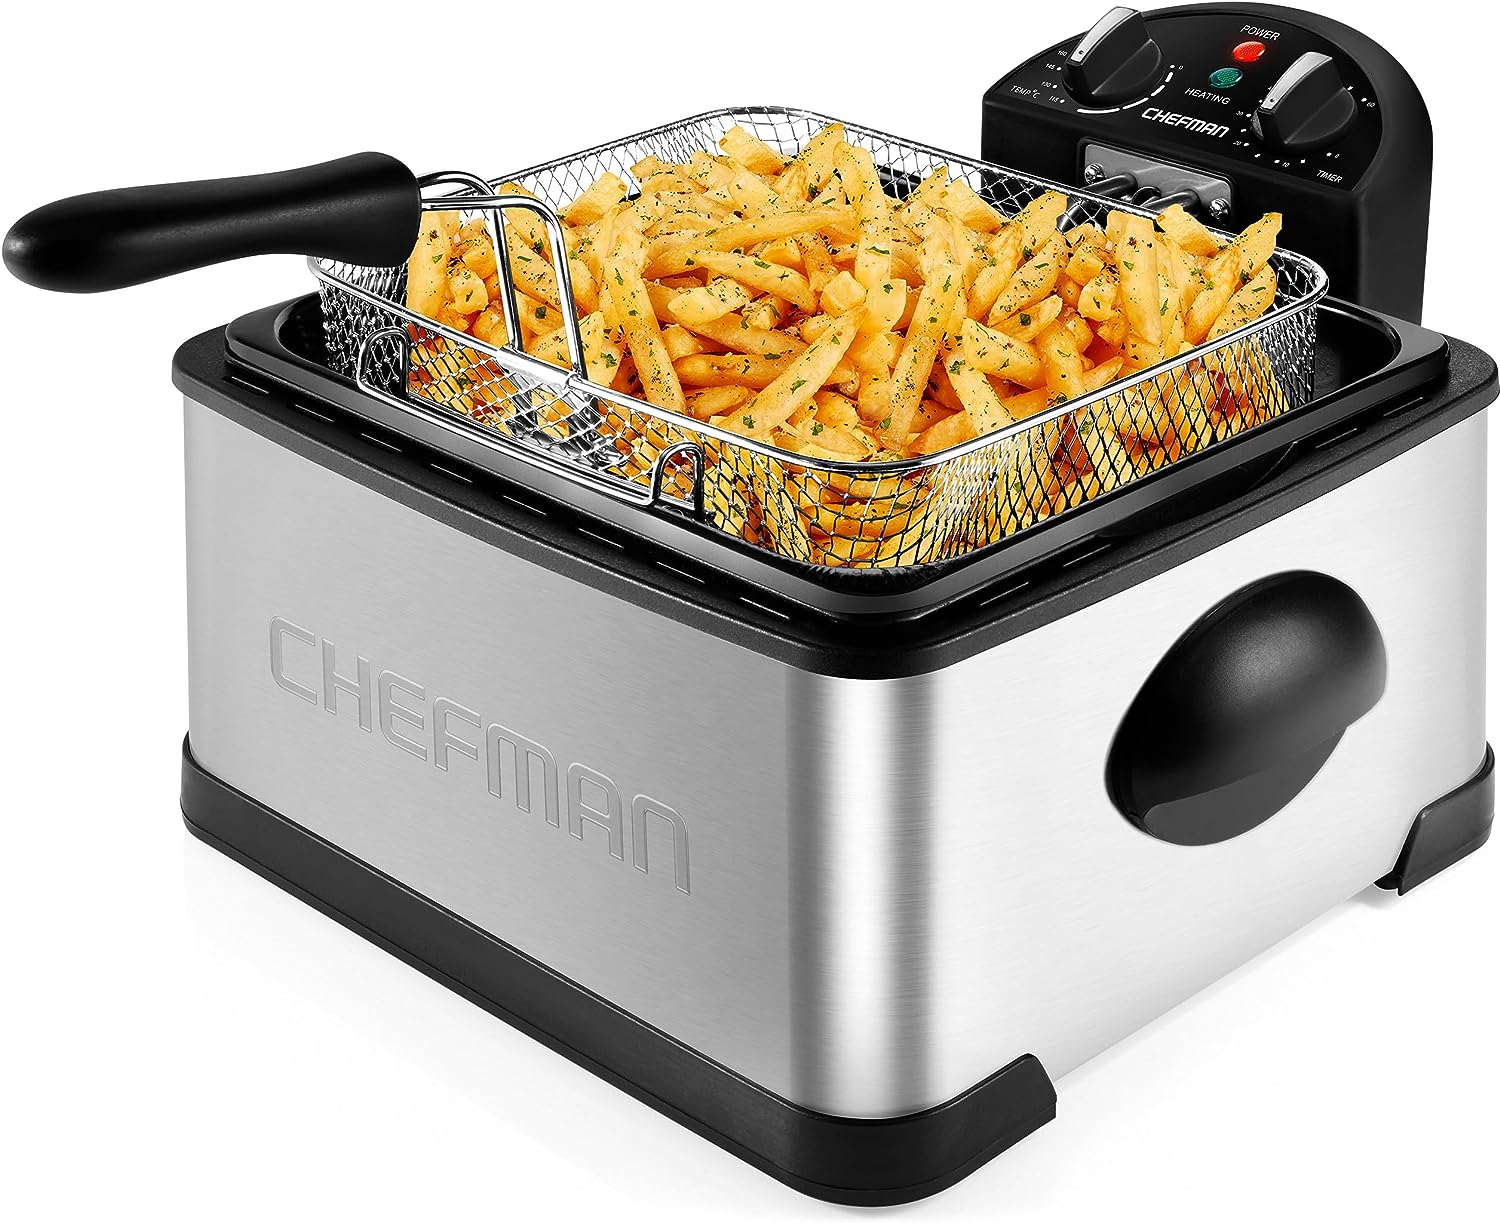 Chefman 4.5 Liter Deep Fryer w/Basket Strainer, XL Jumbo Size, Adjustable Temperature  Timer, Perfect for Fried Chicken, Shrimp, French Fries, Chips  More, Removable Oil-Container, Stainless Steel